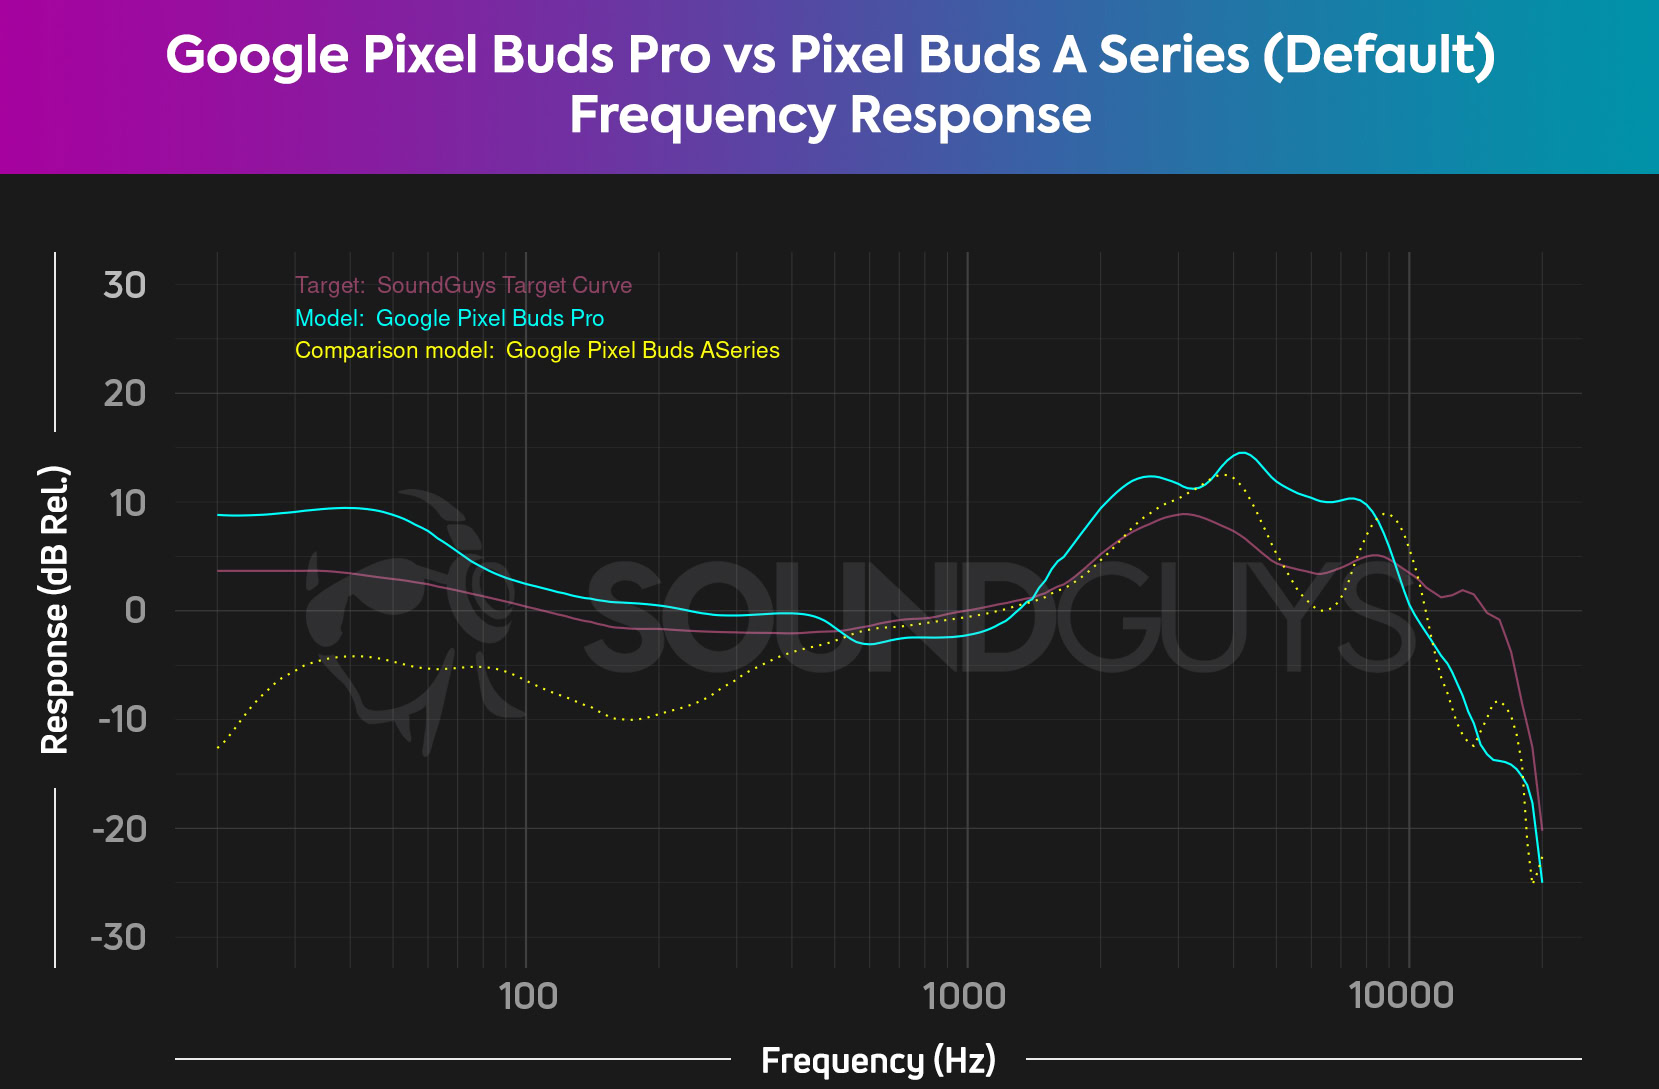 A chart compares the Google Pixel Buds Pro and Google Pixel Buds A Series (Default EQ) frequency responses, revealing the Pro are closer to the SoundGuys Target Curve.